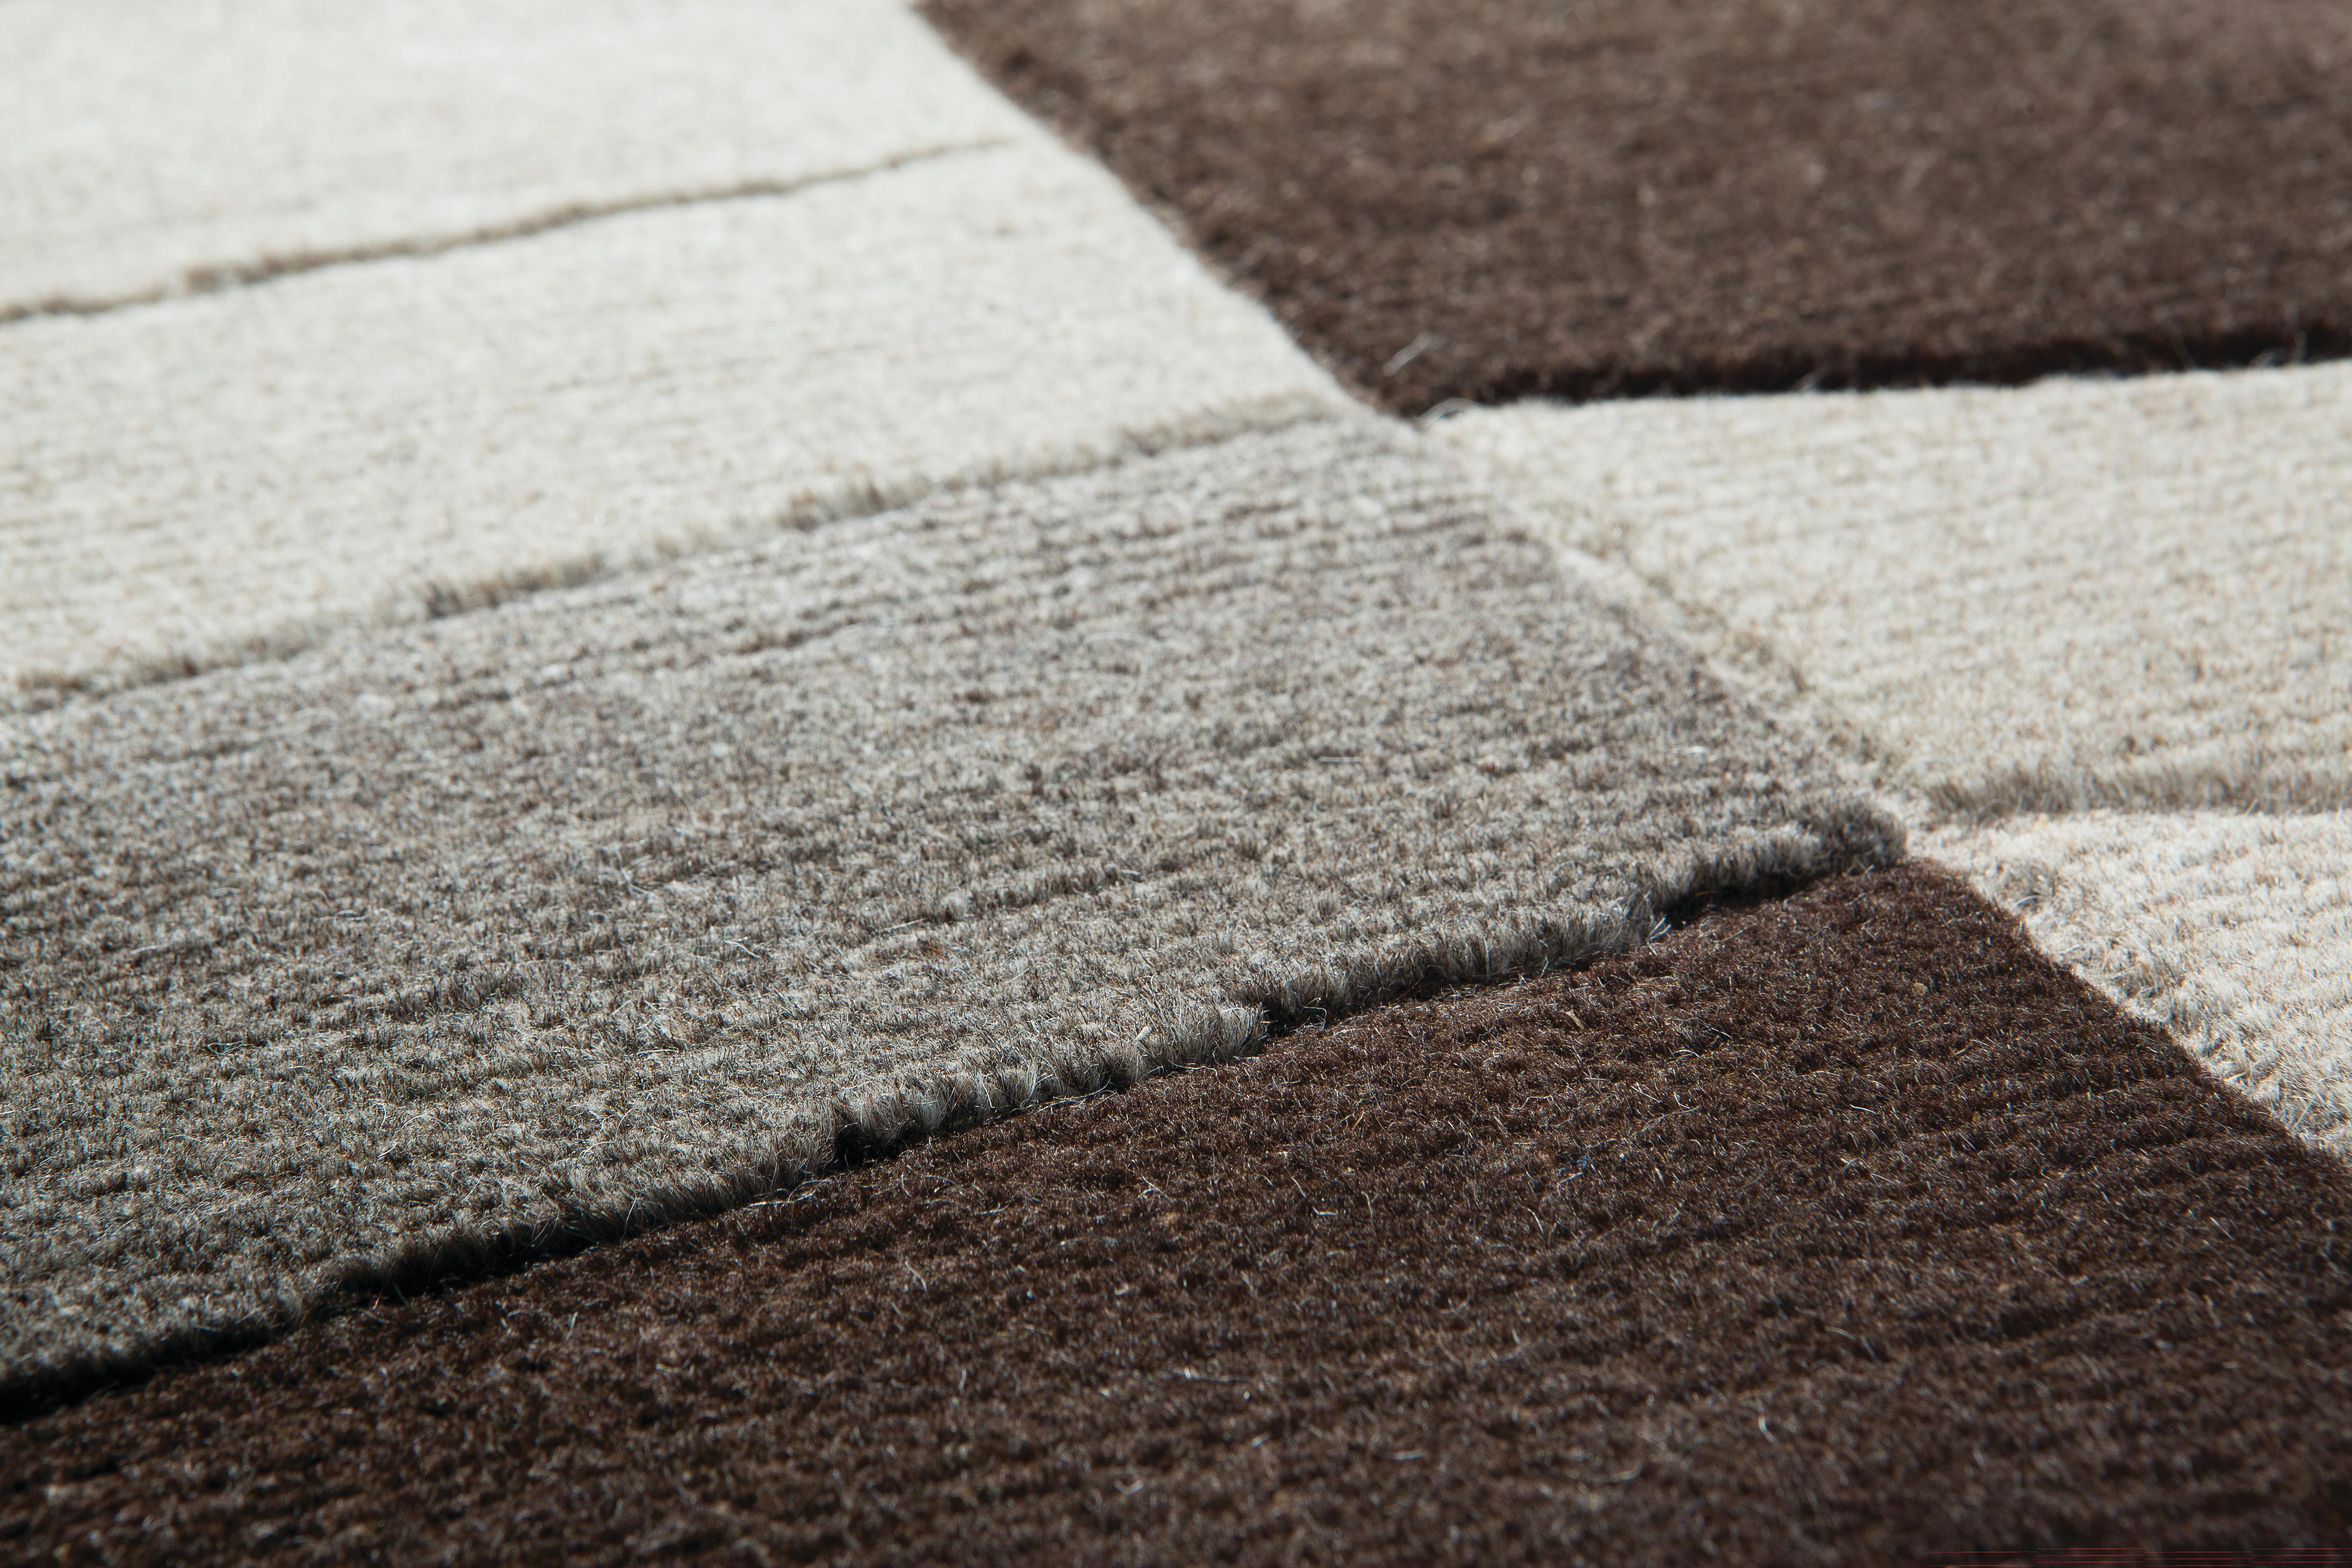 Annapurna carpets by Bartoli design are hand knotted in Himalayan undyed wool, hand knotted with 60 knots per sqm
Special treatments are reserved for this kind of material, and it gives such a particular consistency and colors
Inspired by Nepalese